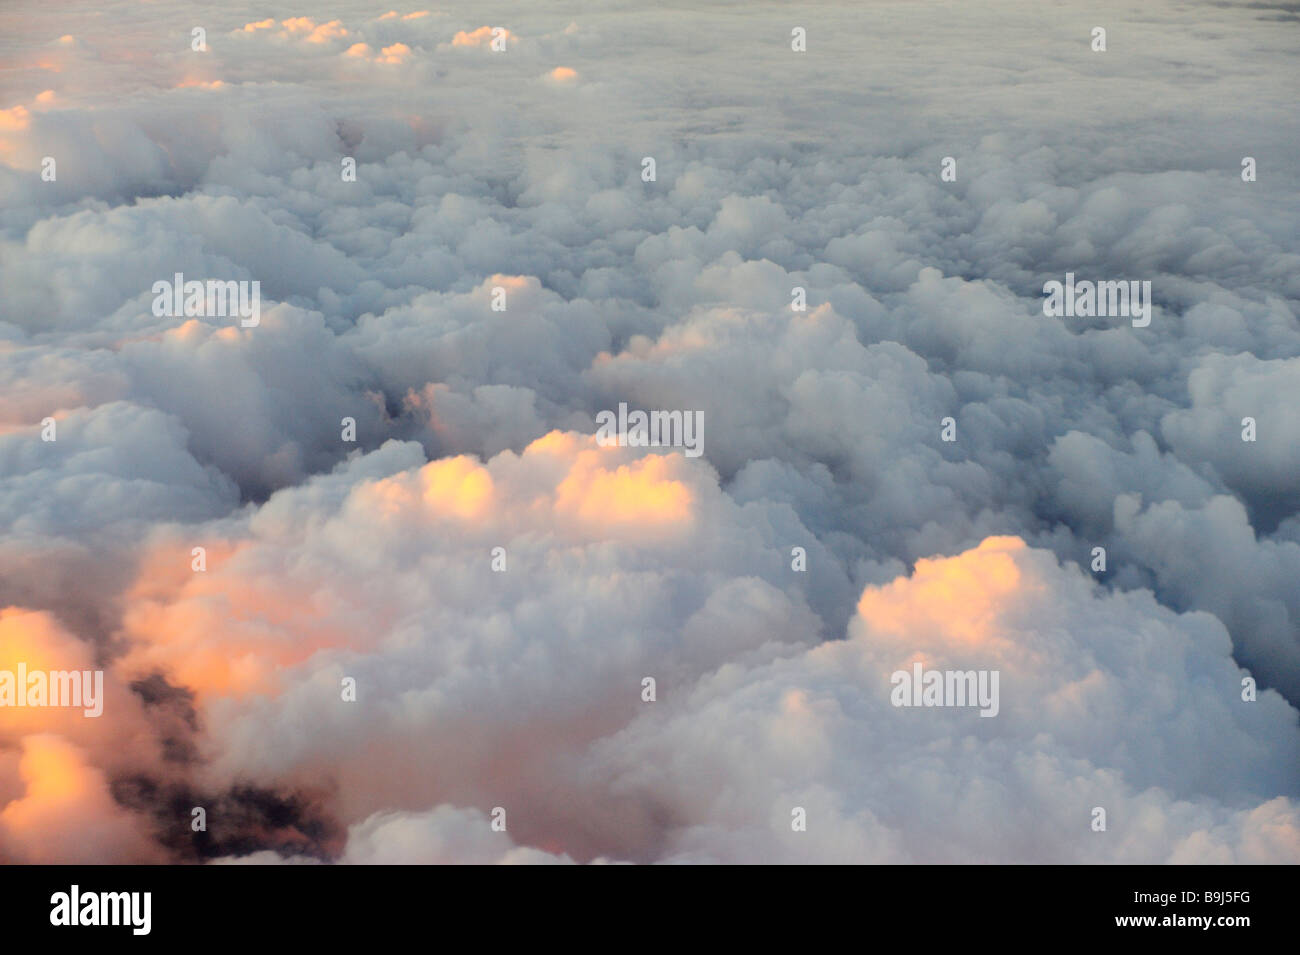 Clouds seen from above at sunrise Stock Photo